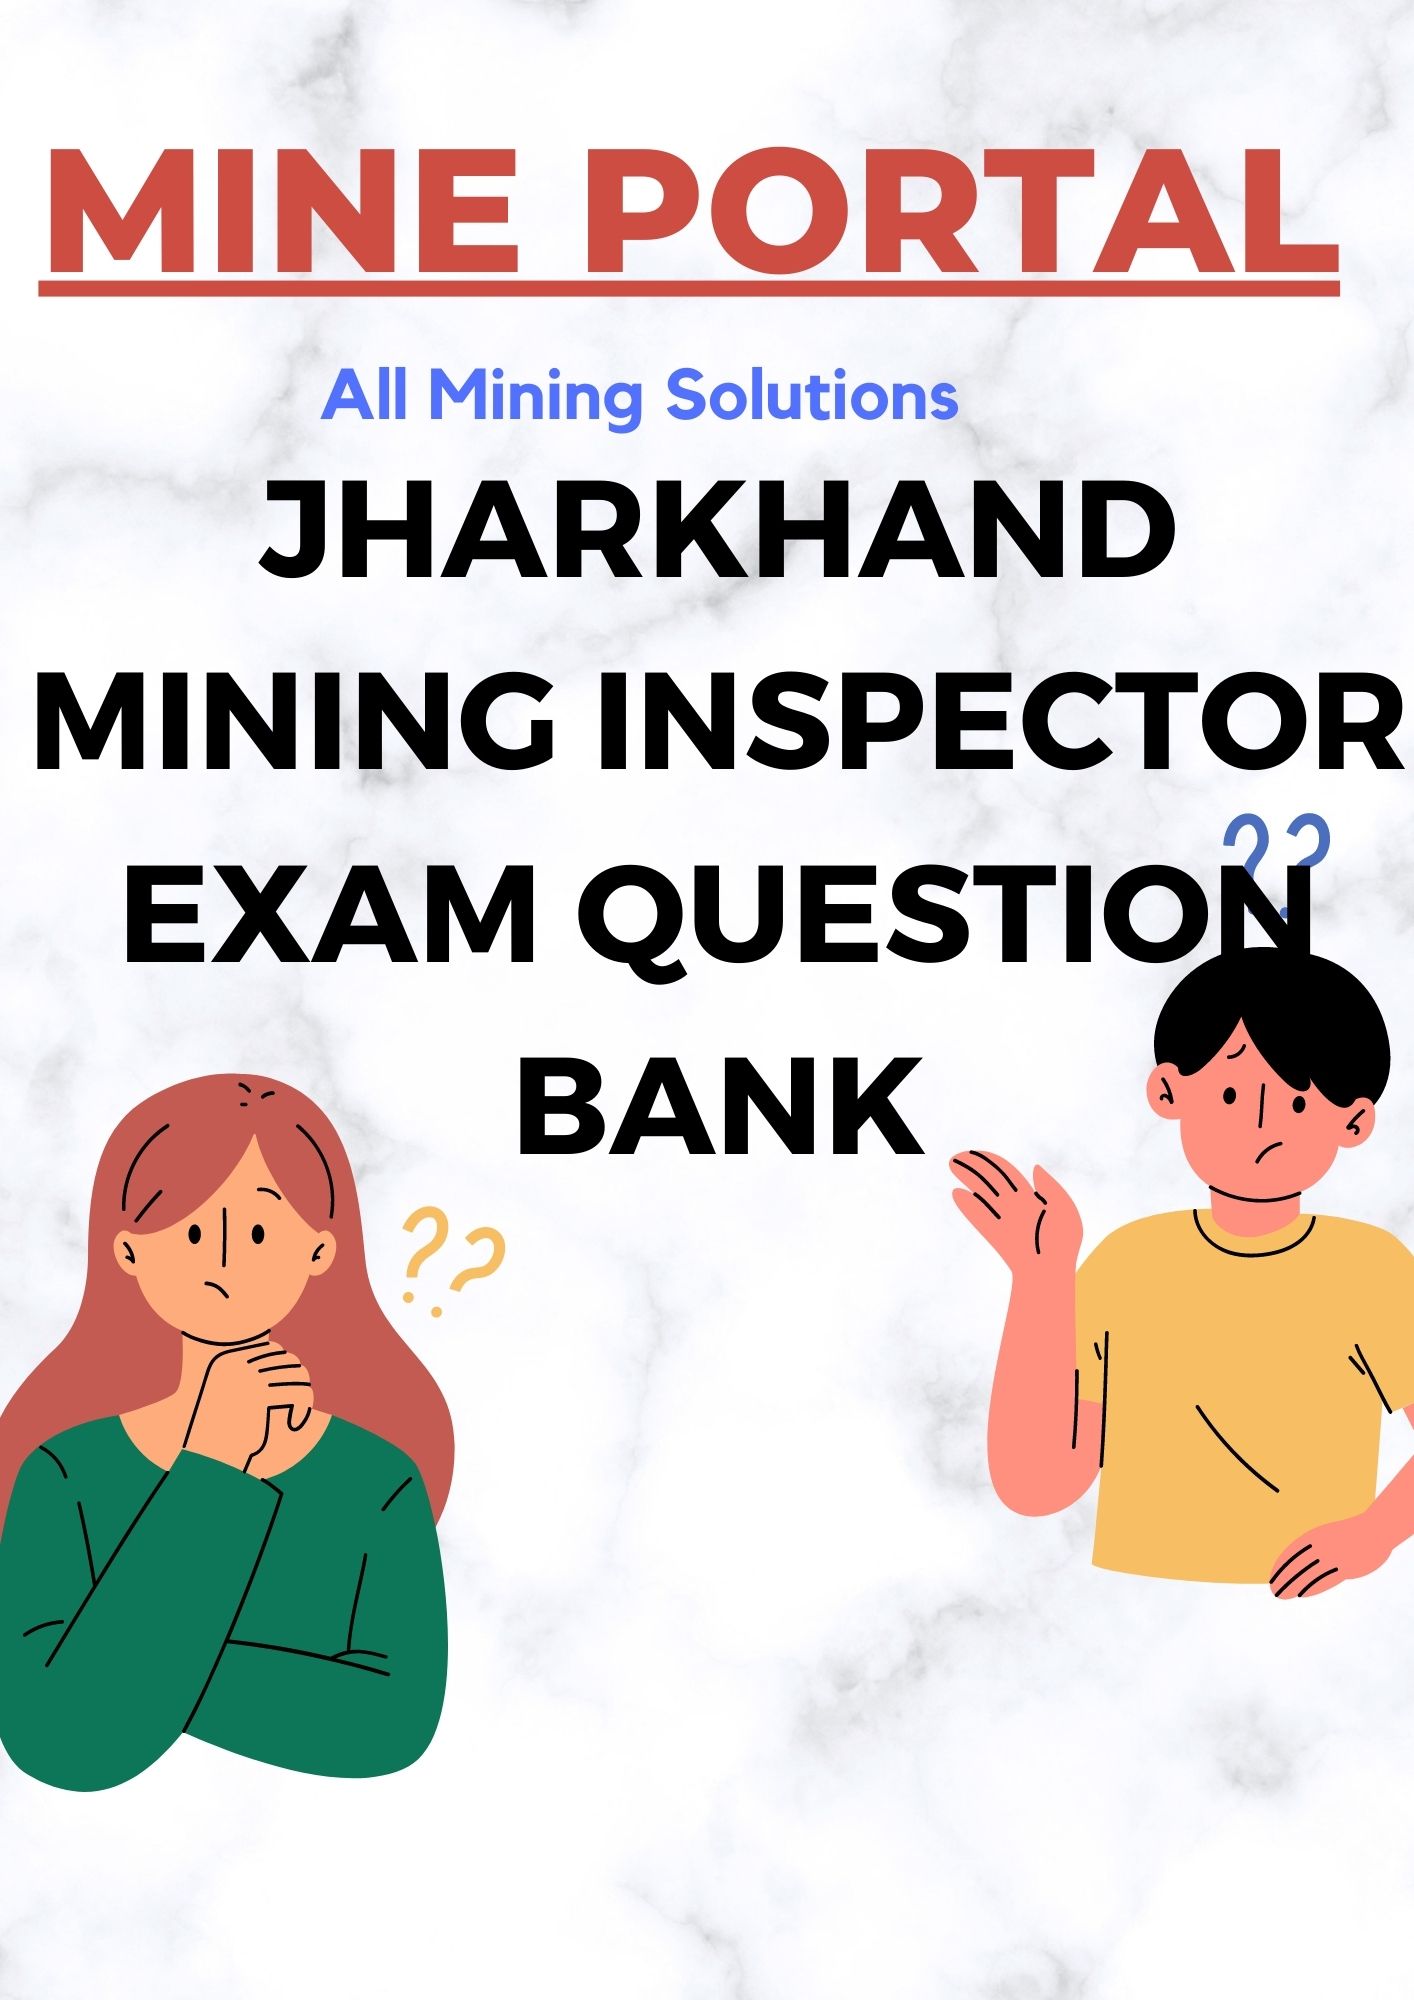 MINING GEOLOGY QUESTION BANK